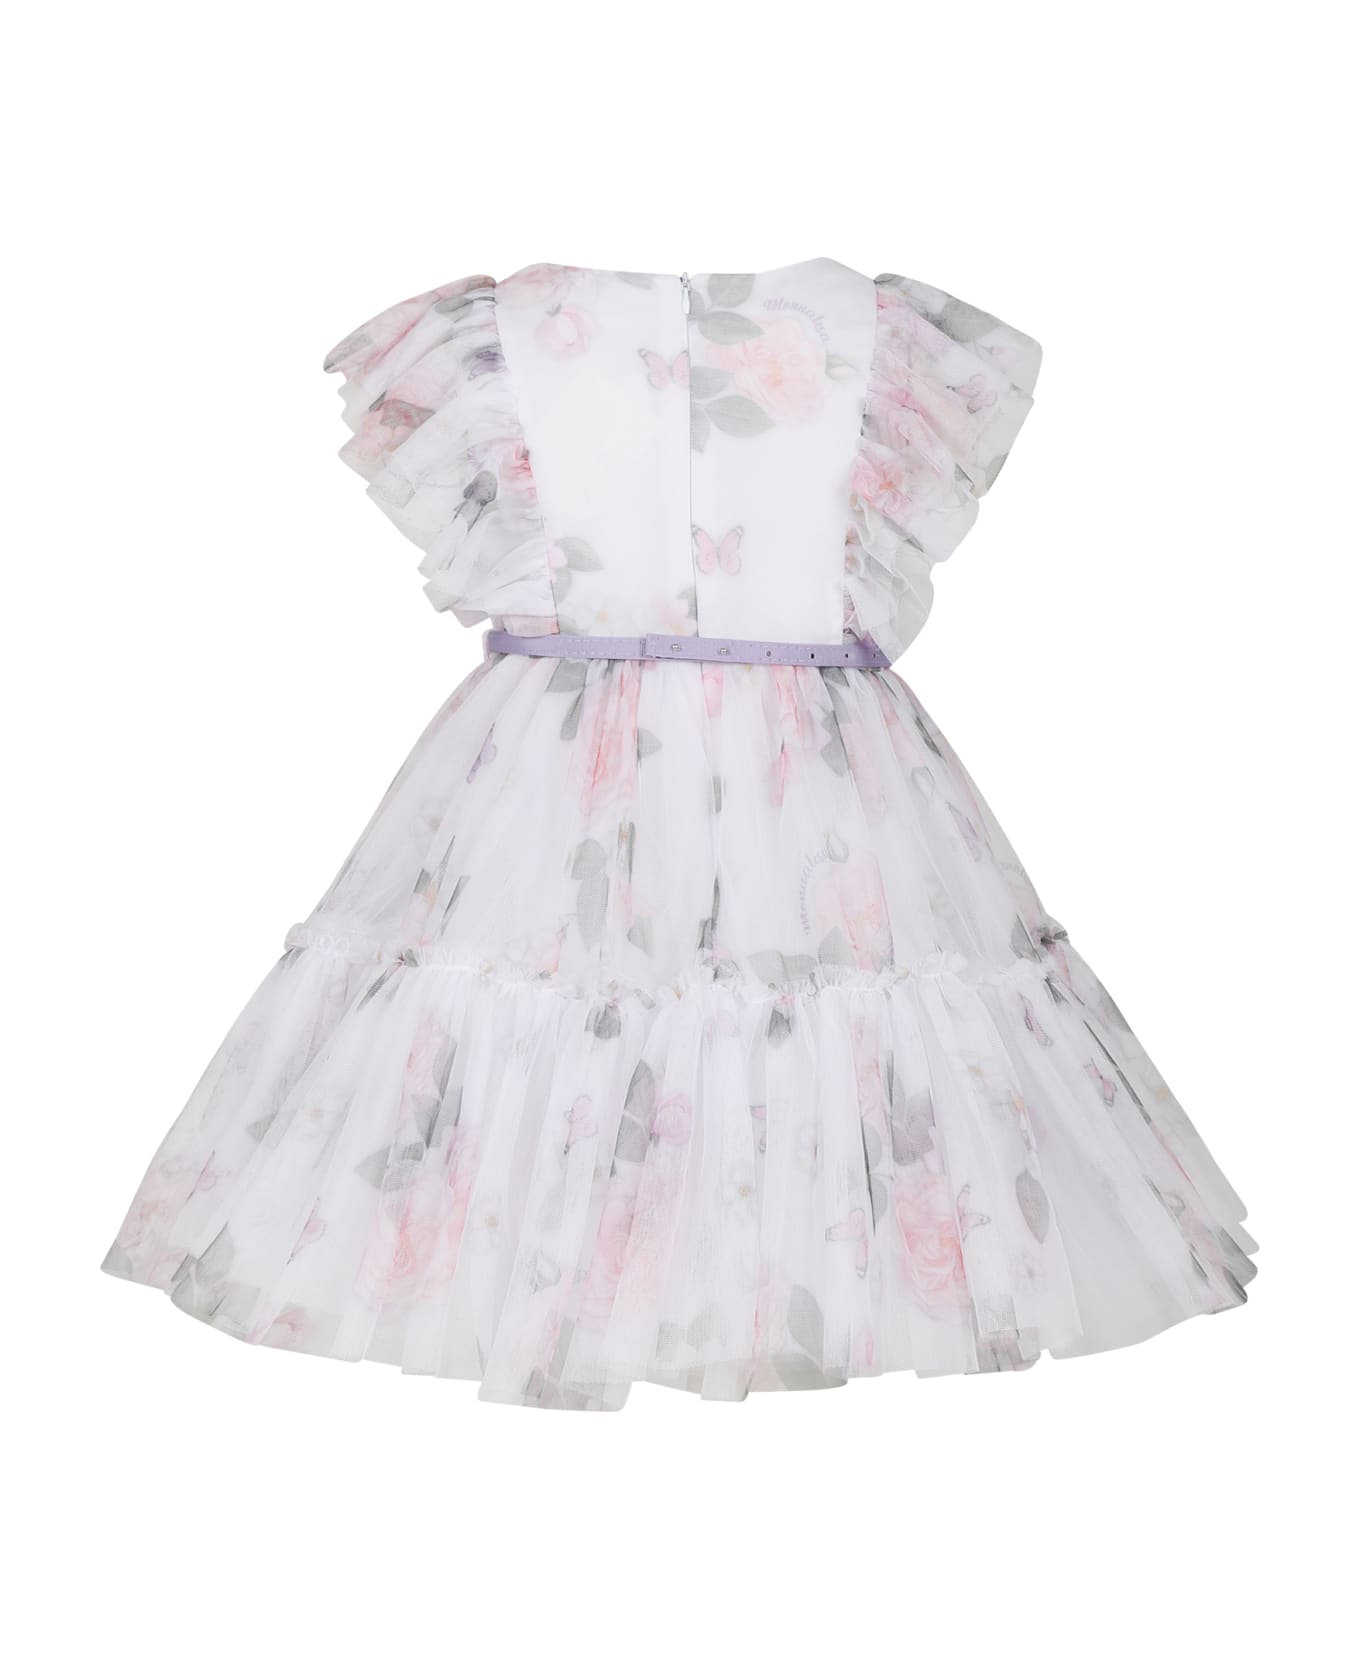 Monnalisa White Dress For Girl With Floral Print - White ワンピース＆ドレス